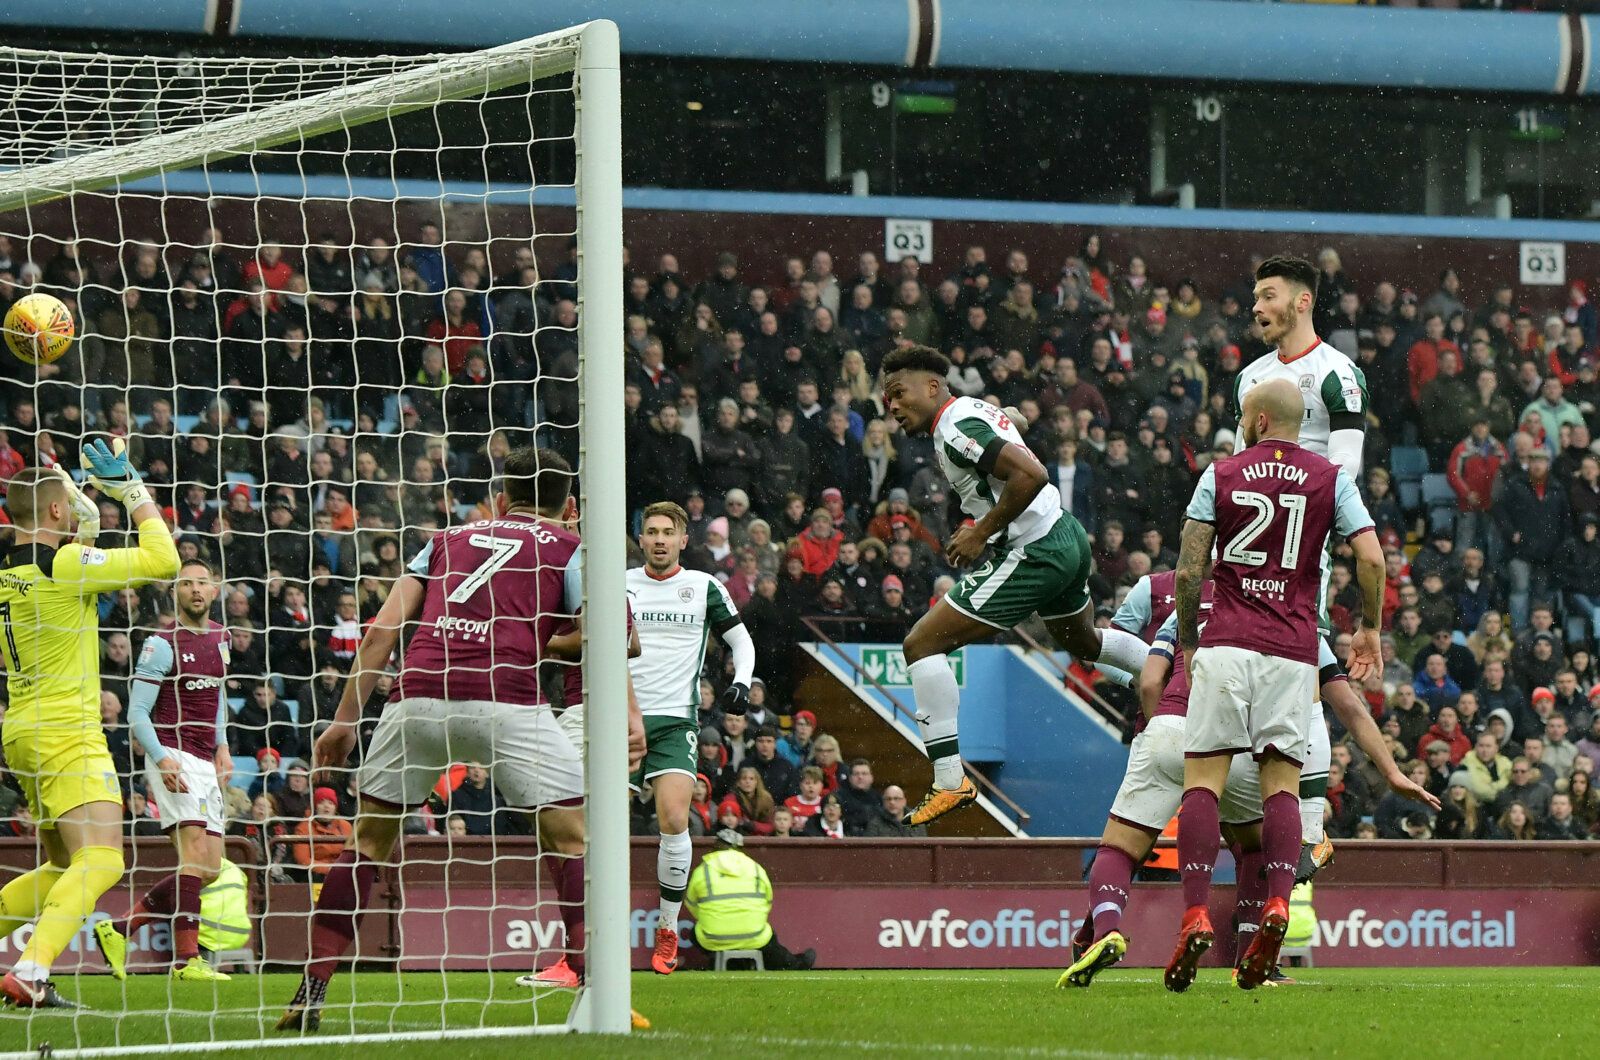 Soccer Football - Championship - Aston Villa vs Barnsley - Villa Park, Birmingham, Britain - January 20, 2018   Barnsley's Dimitri Cavare scores their first goal   Action Images/Paul Burrows    EDITORIAL USE ONLY. No use with unauthorized audio, video, data, fixture lists, club/league logos or 